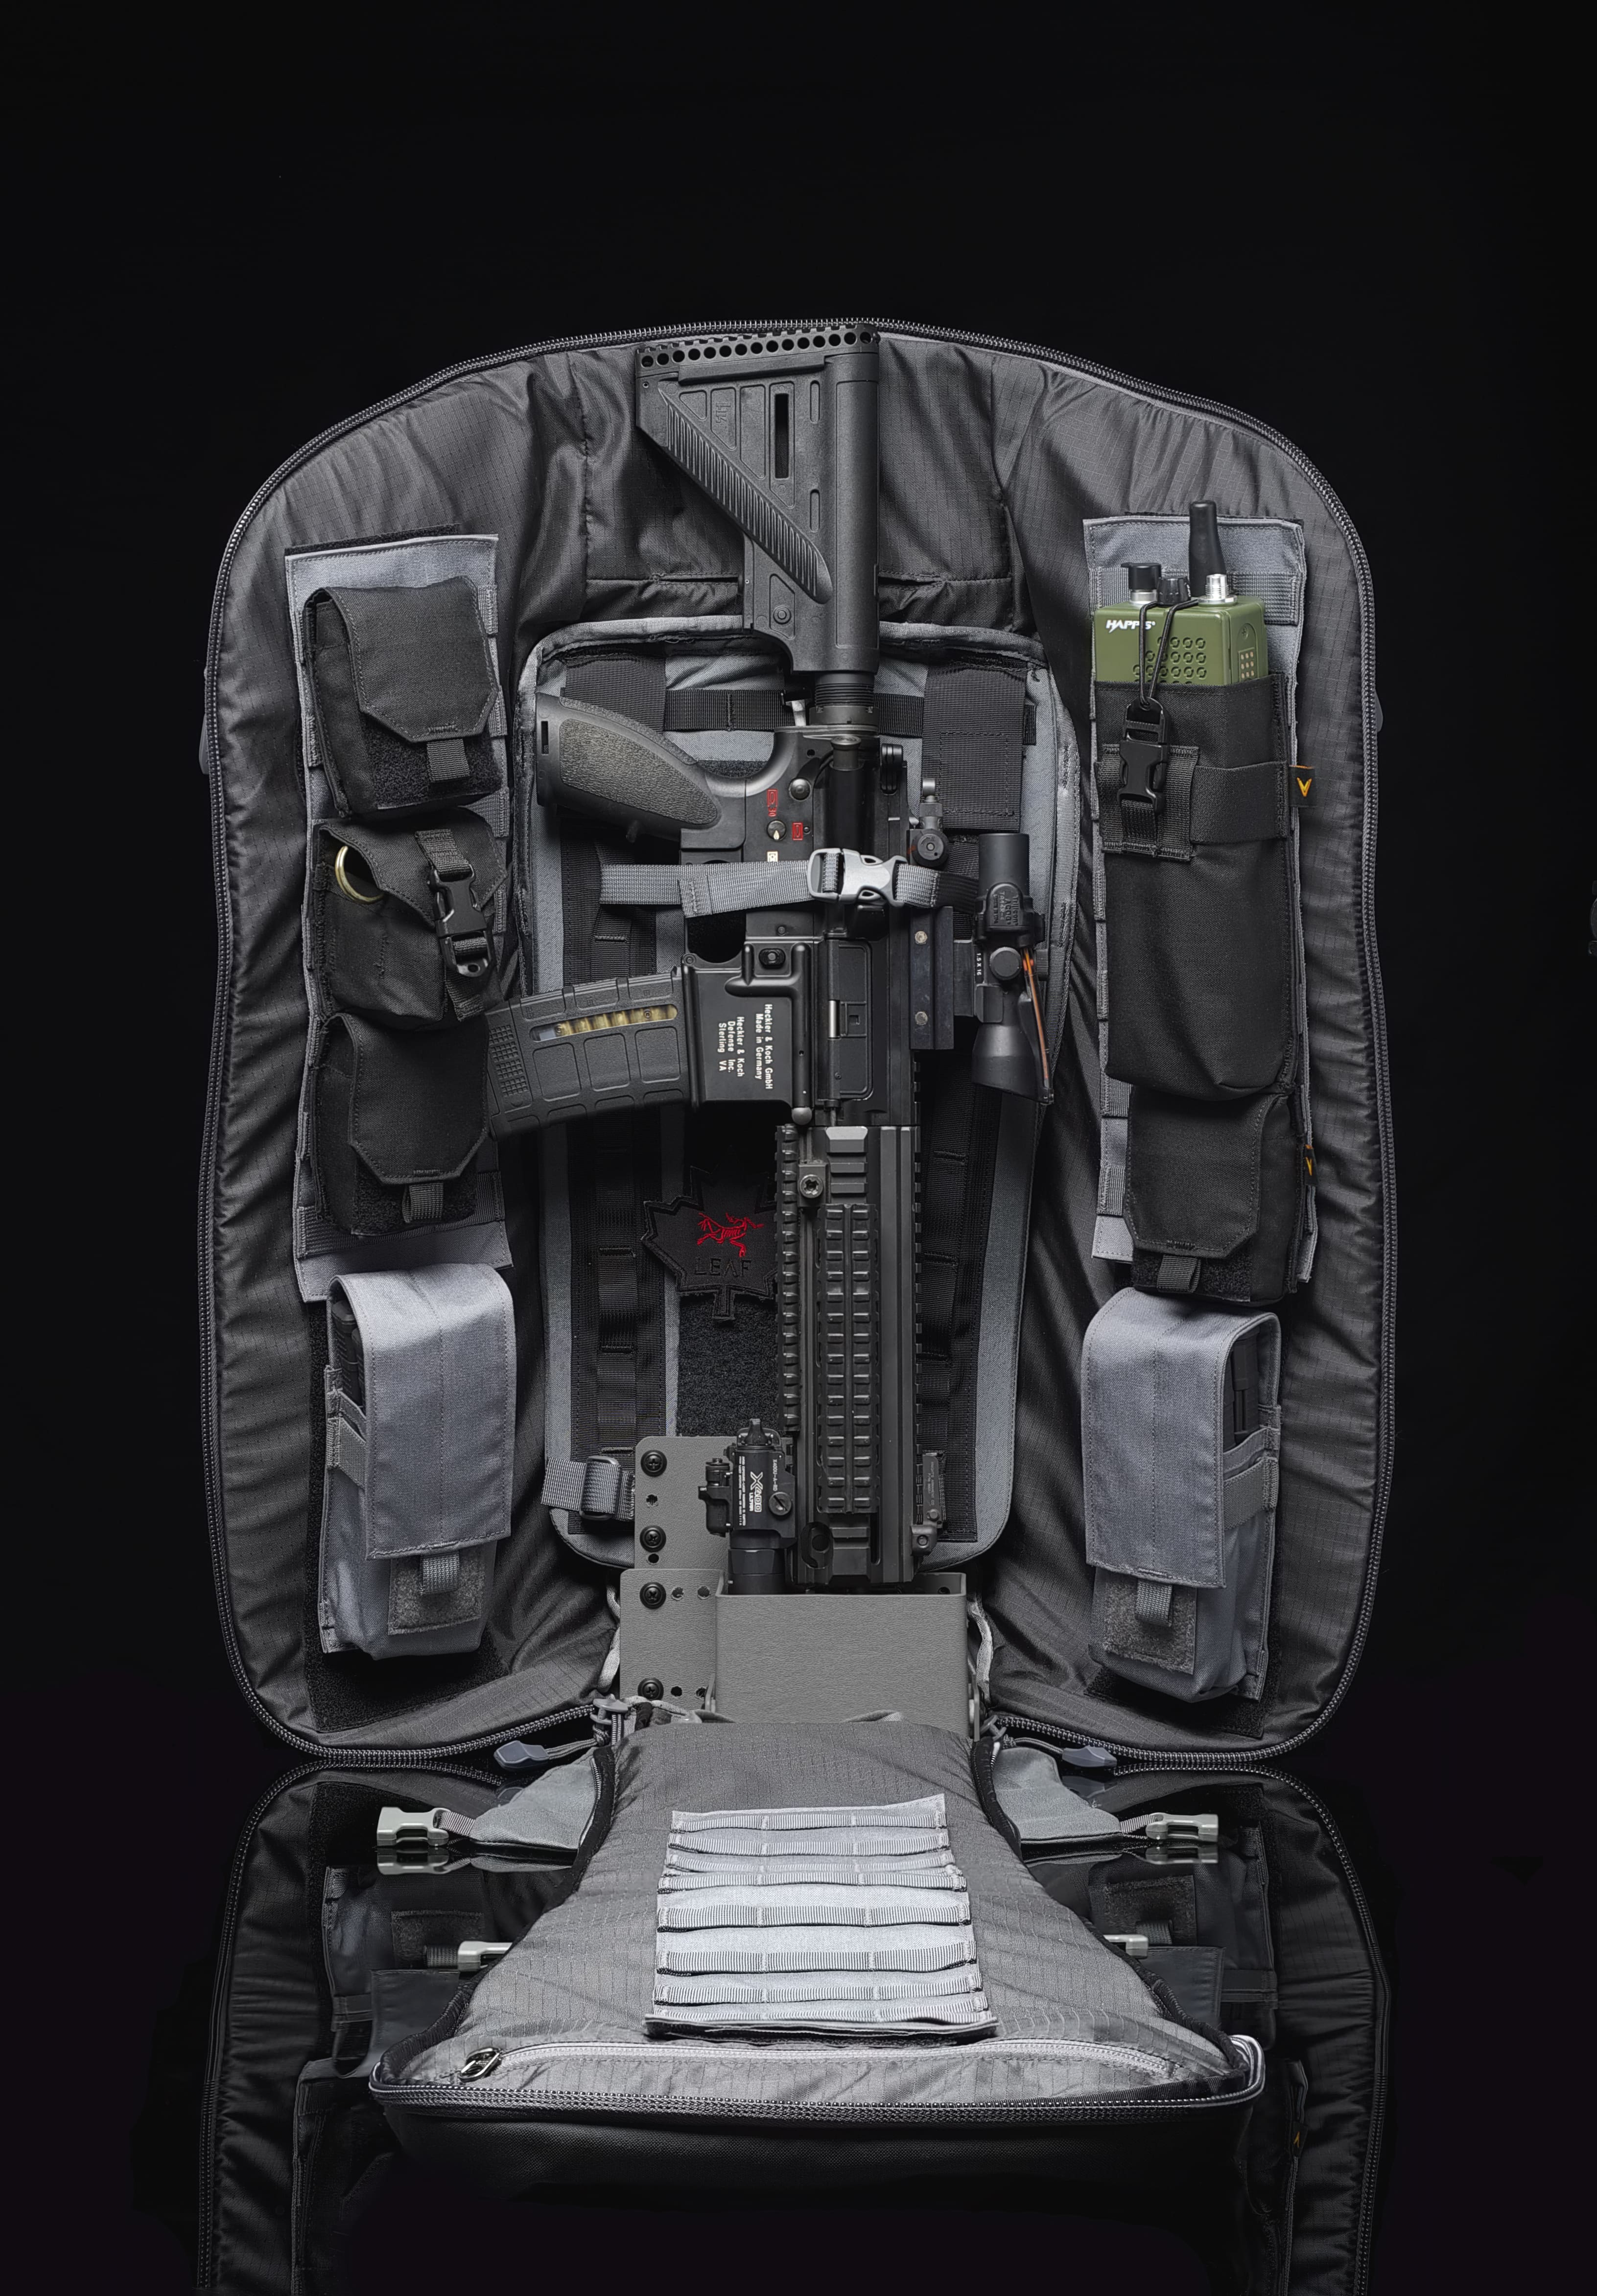 Velocity Systems Introduces Accessories for Arc'teryx LEAF Khard